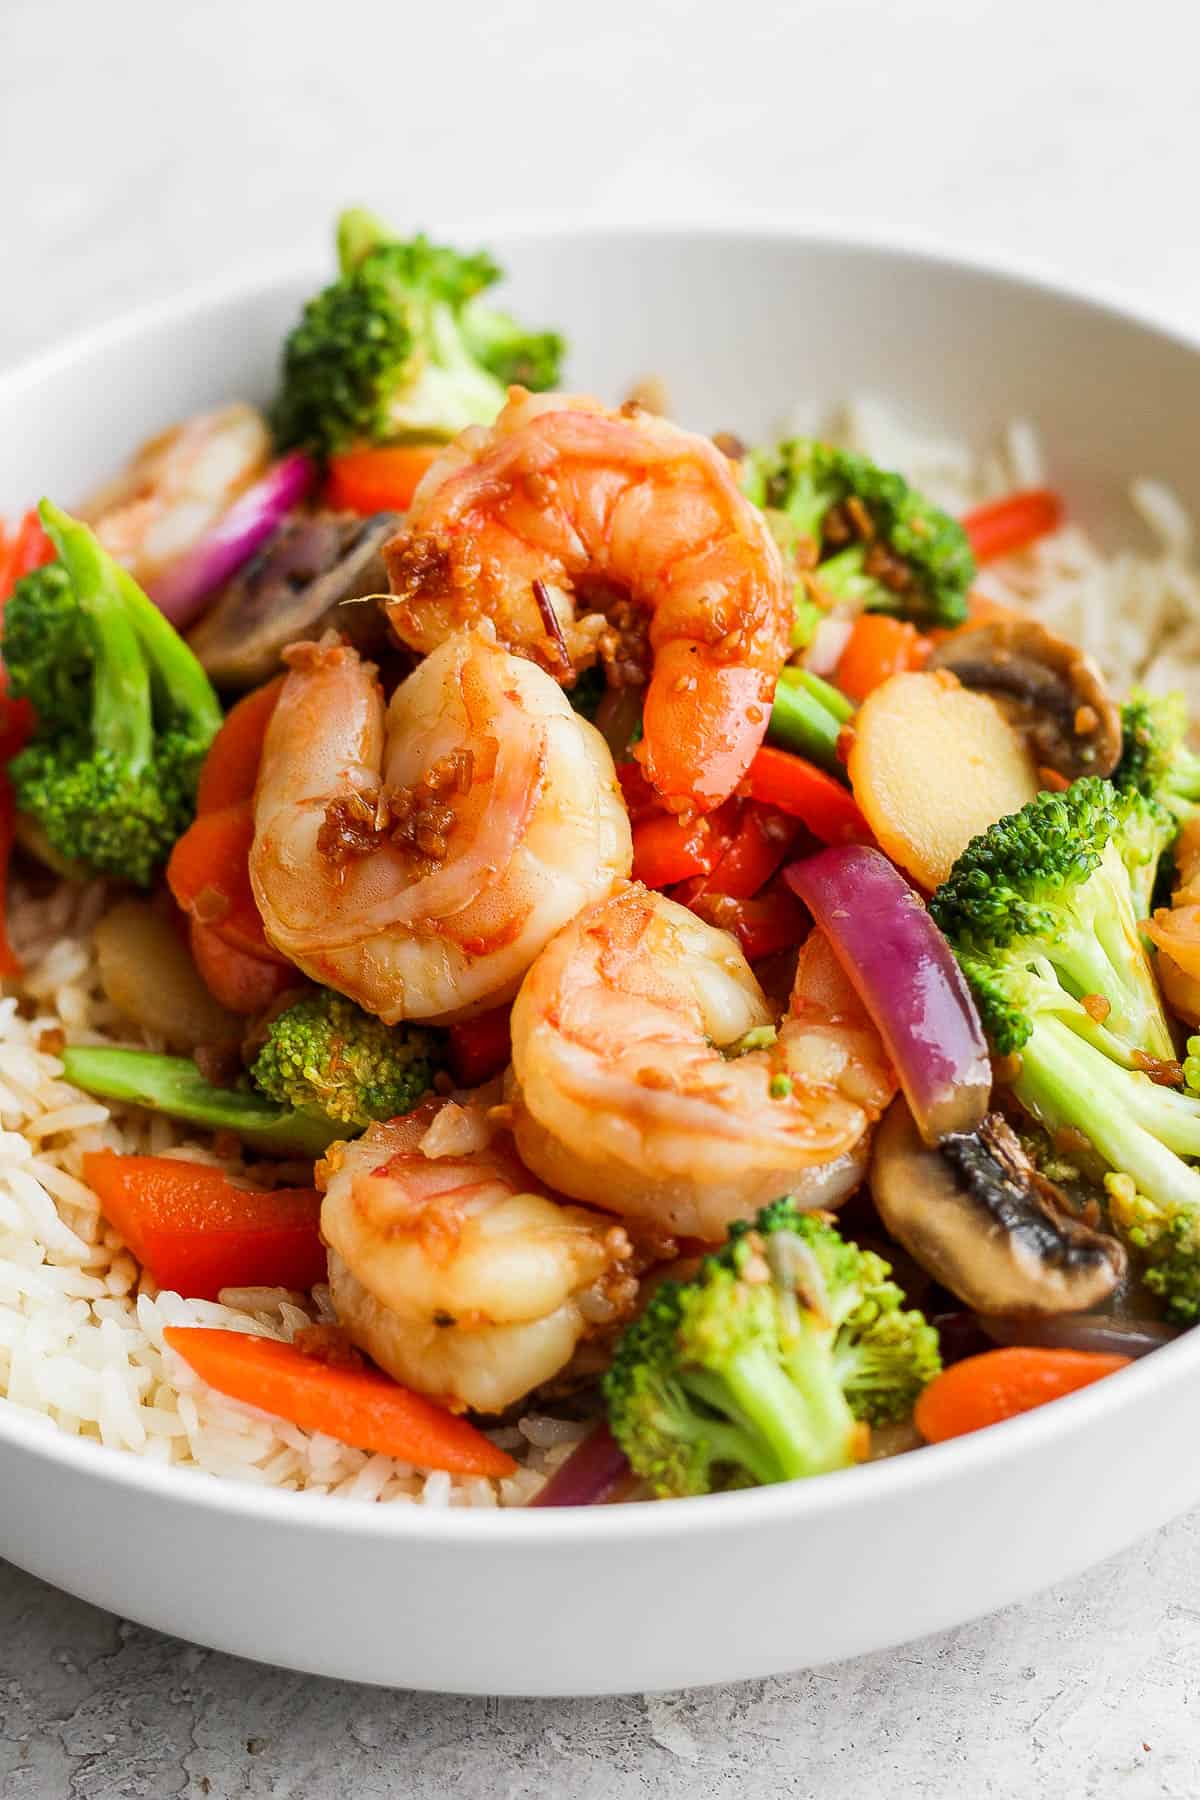 Shrimp stir fry in a bowl with rice.